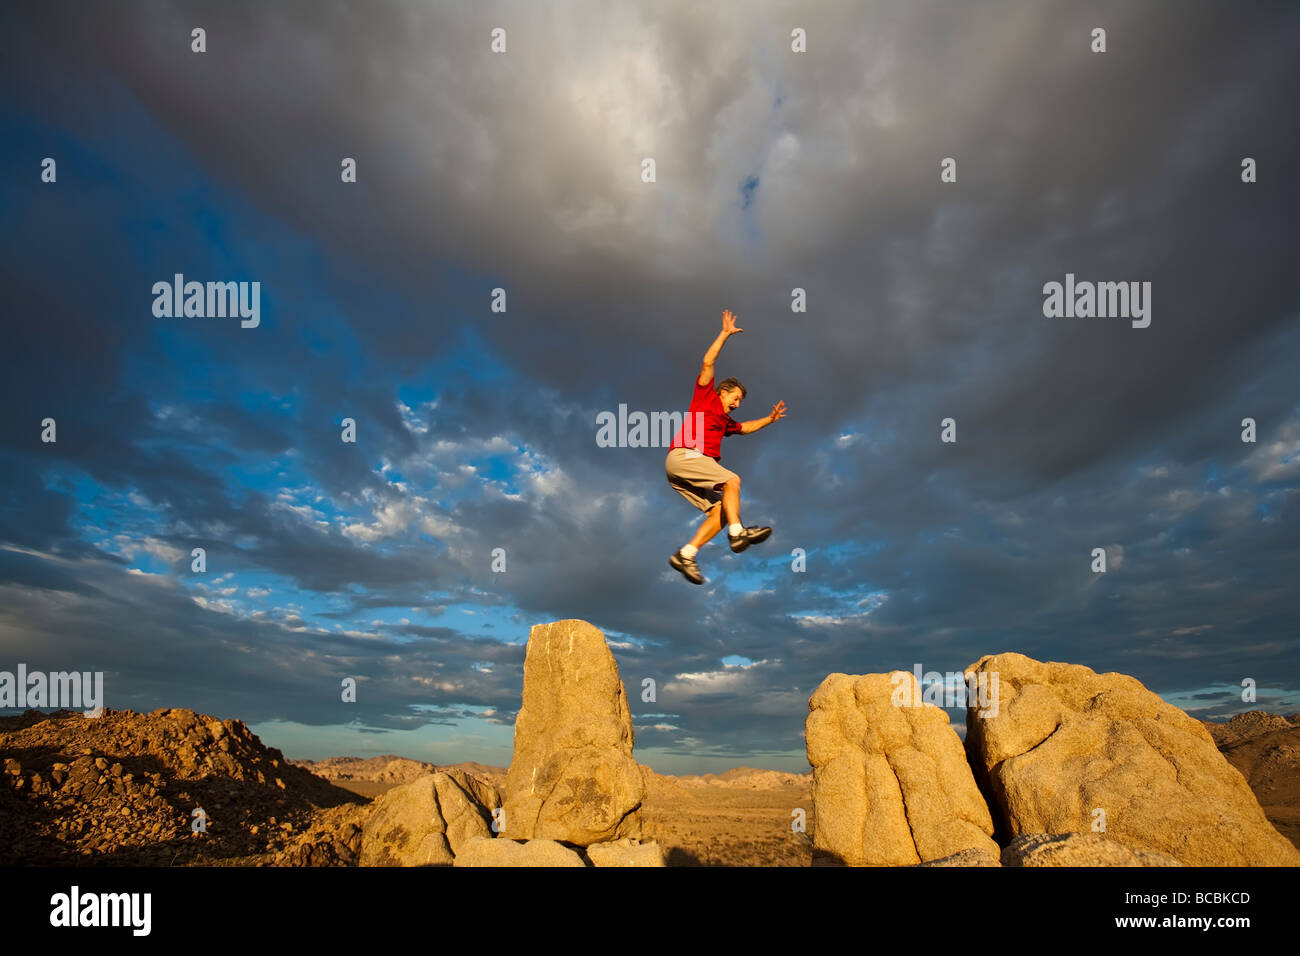 Rock climber leaps across a gap on the summit of a pinnacle after a successful ascent as storm clouds build in the setting sun Stock Photo